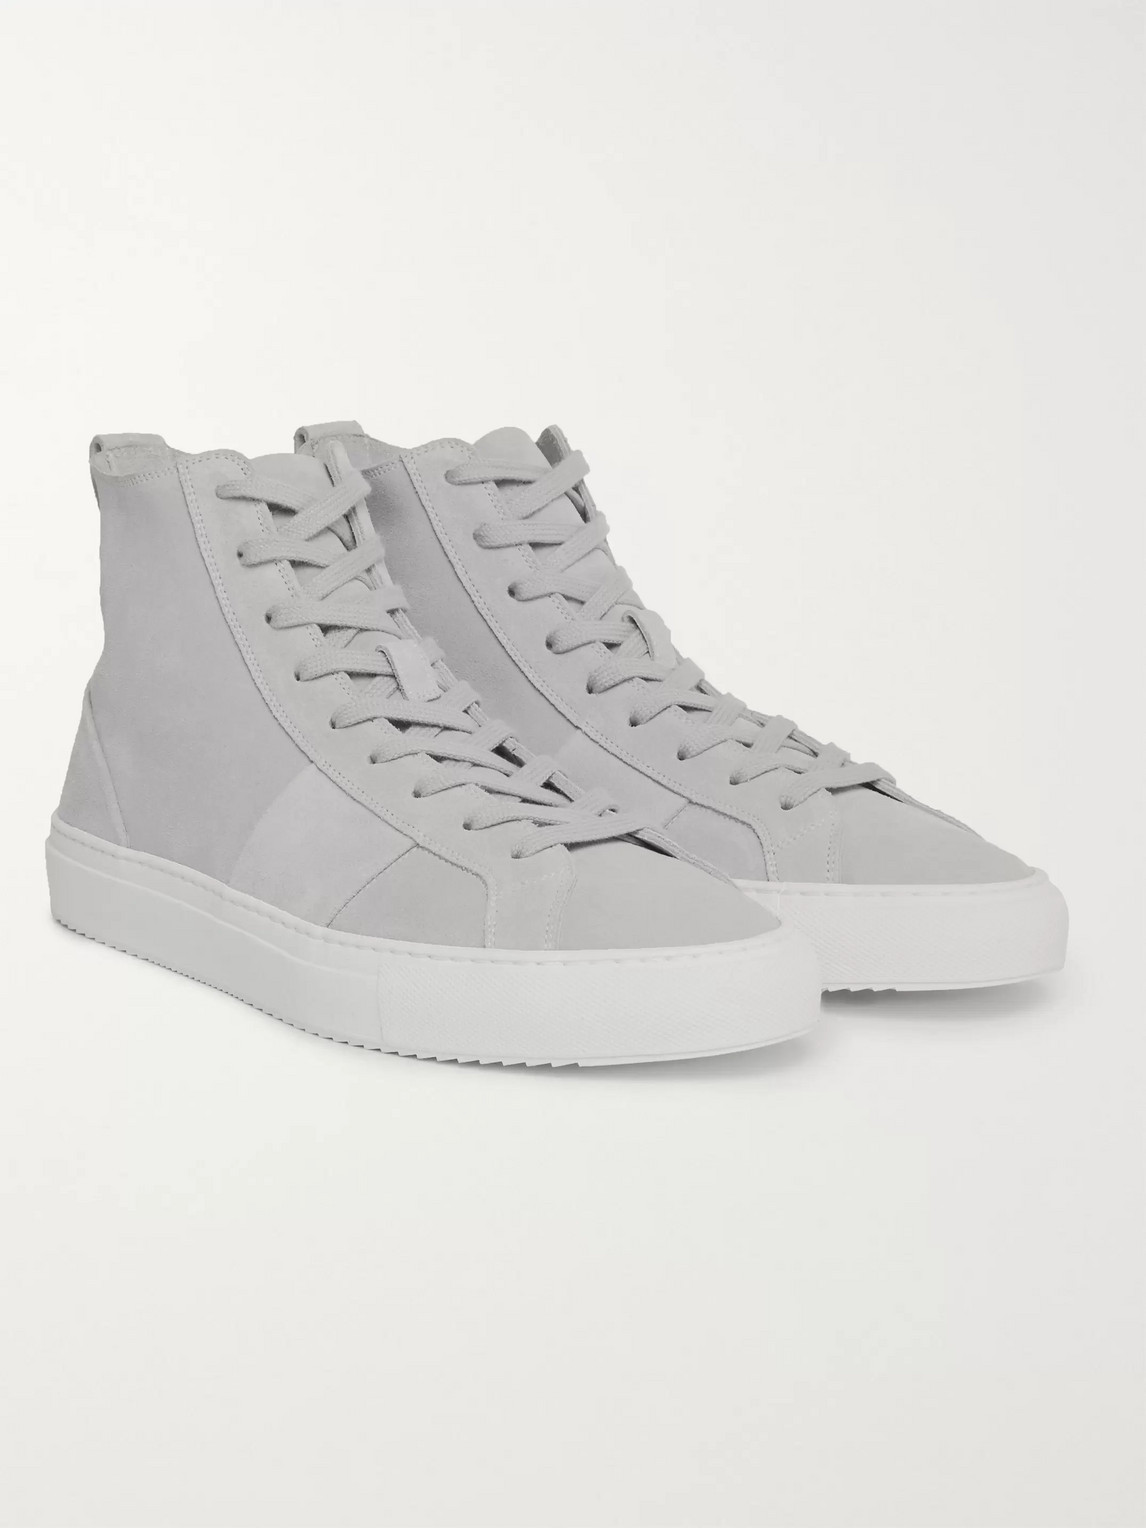 Mr P Larry Suede Sneakers In Gray